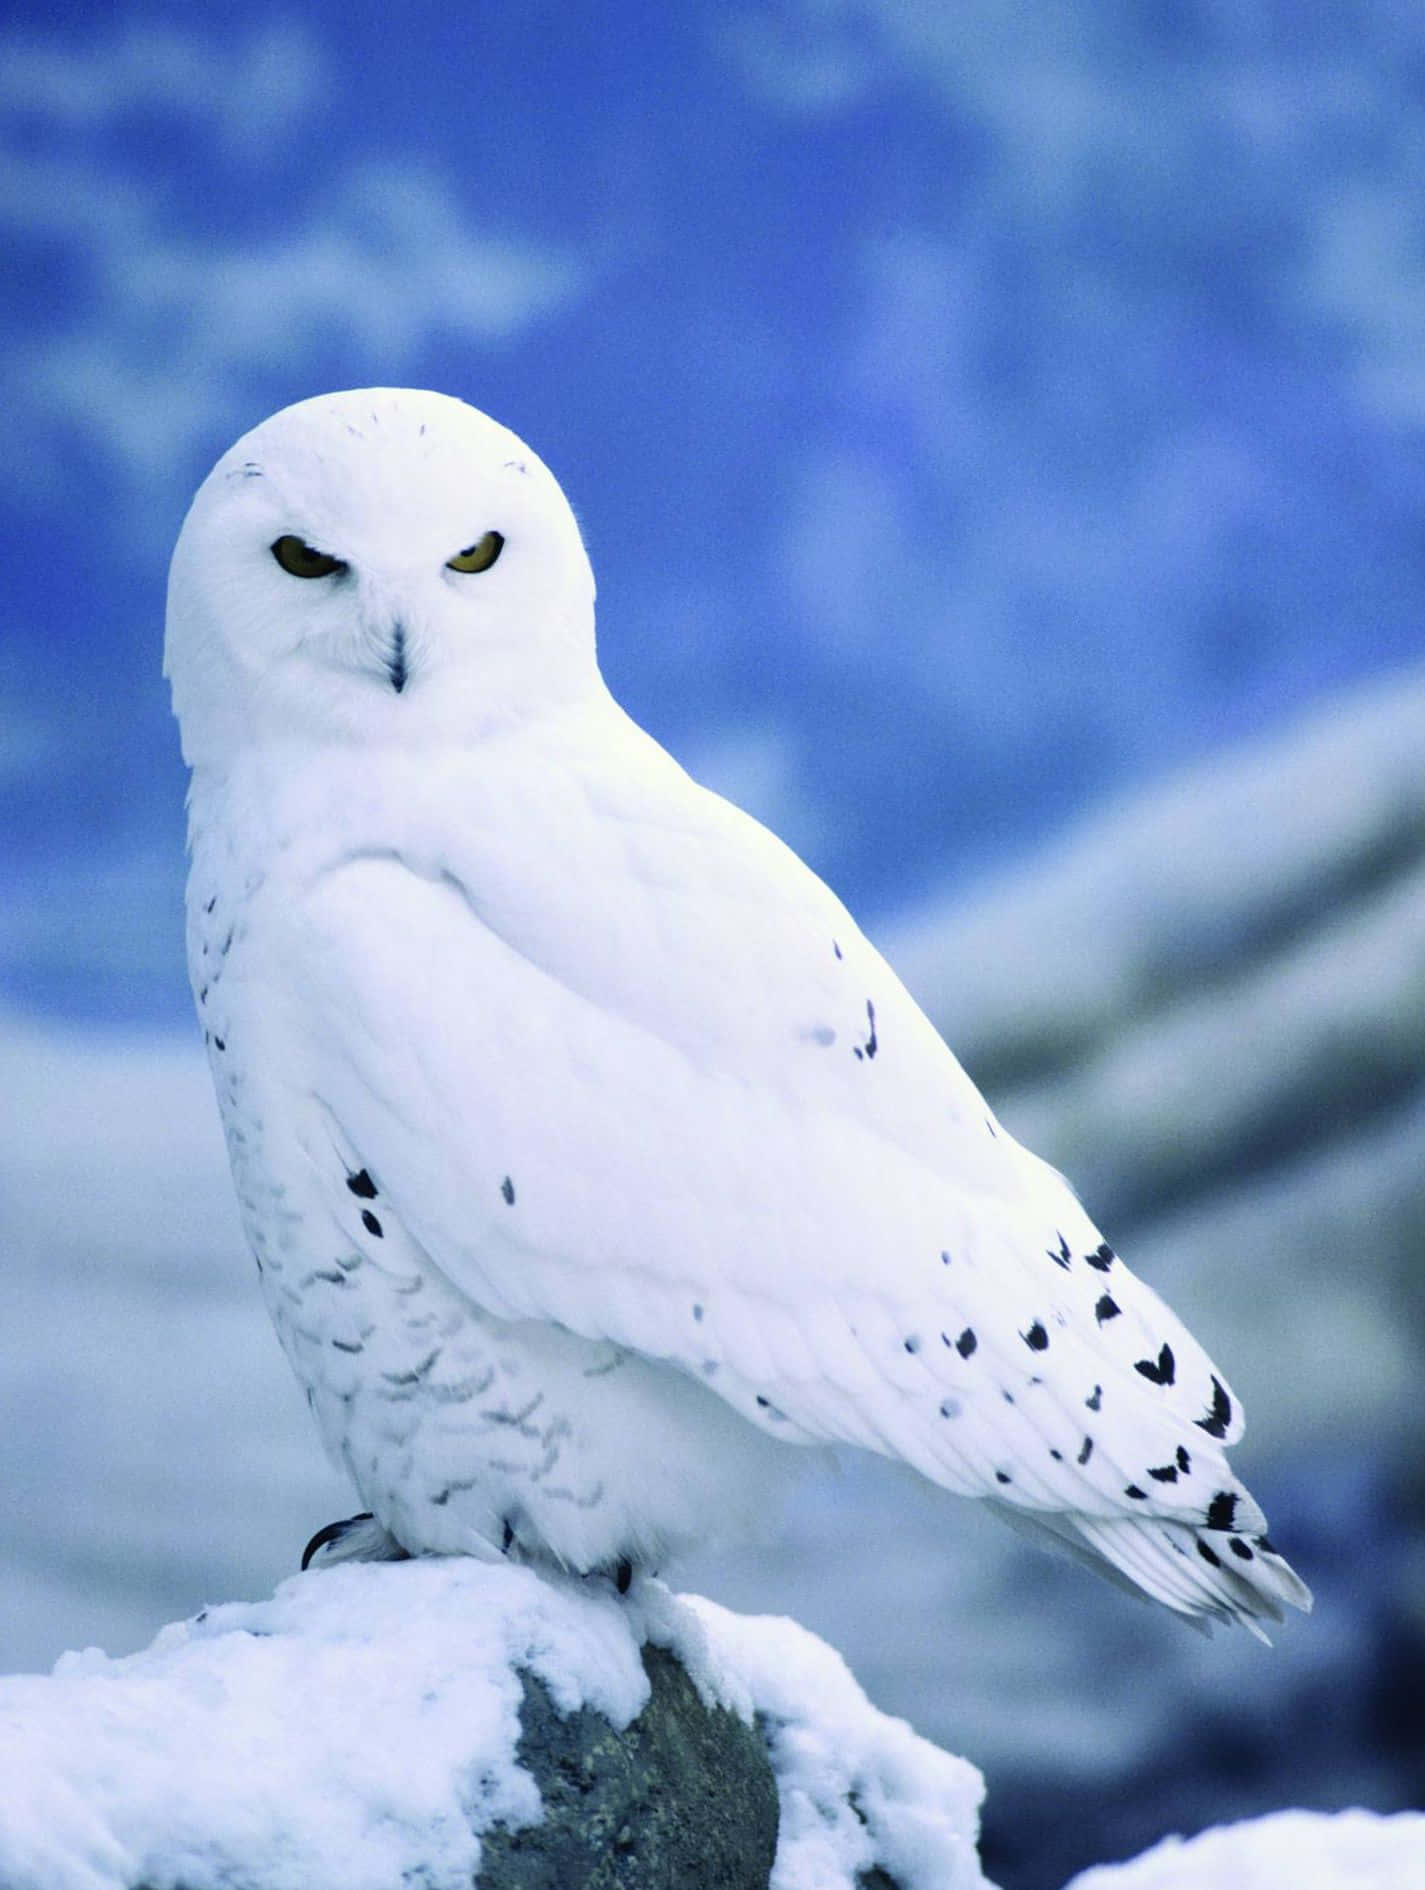 Caption: Majestic Snowy Owl Perched in Nature Wallpaper